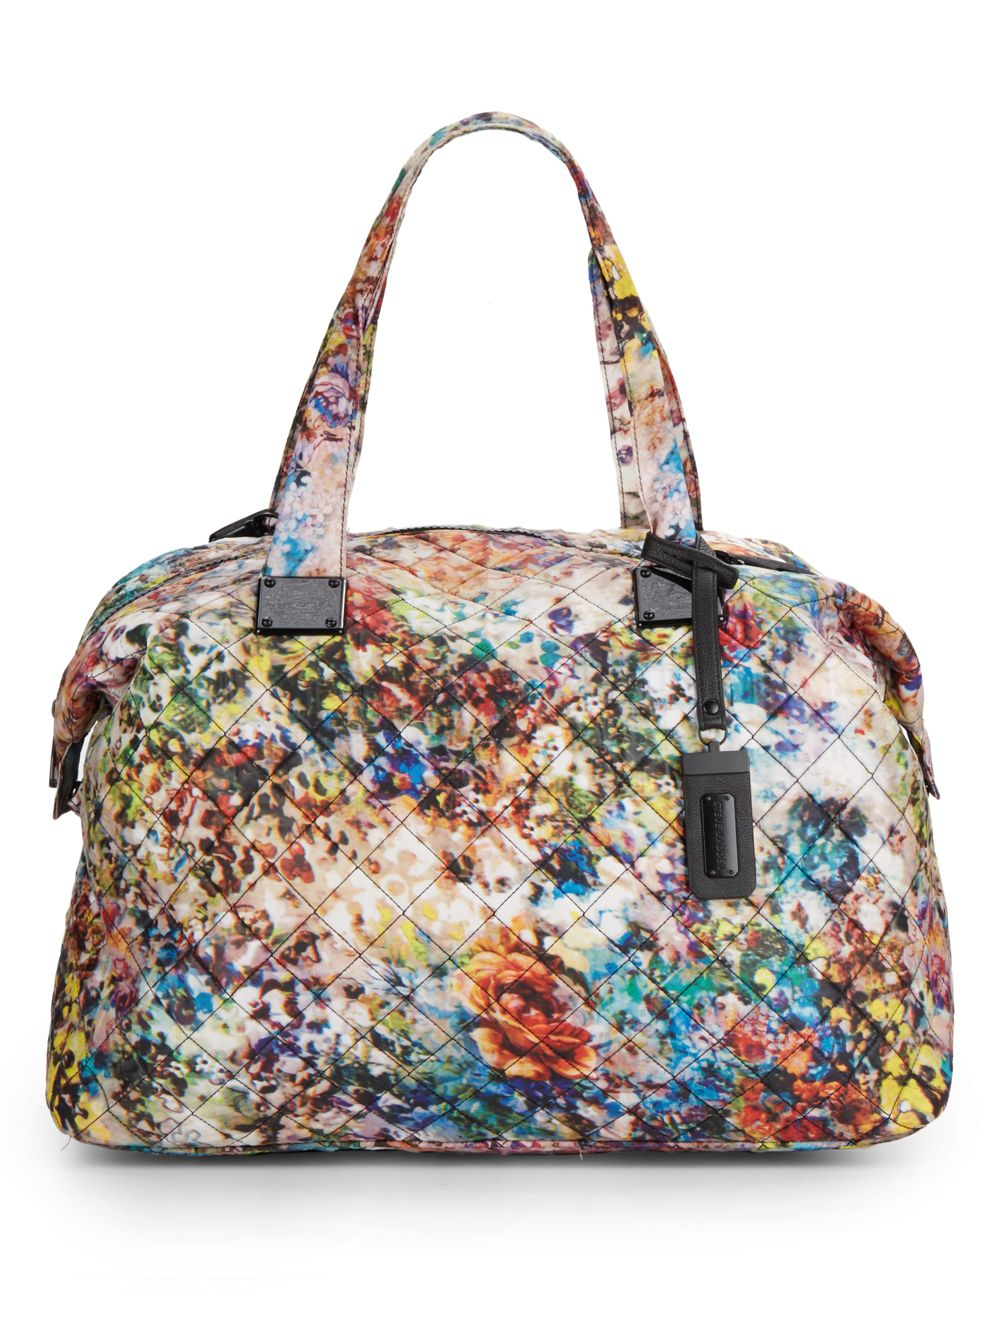 Lyst - Steve Madden Quilted Floral-print Duffle Bag in White